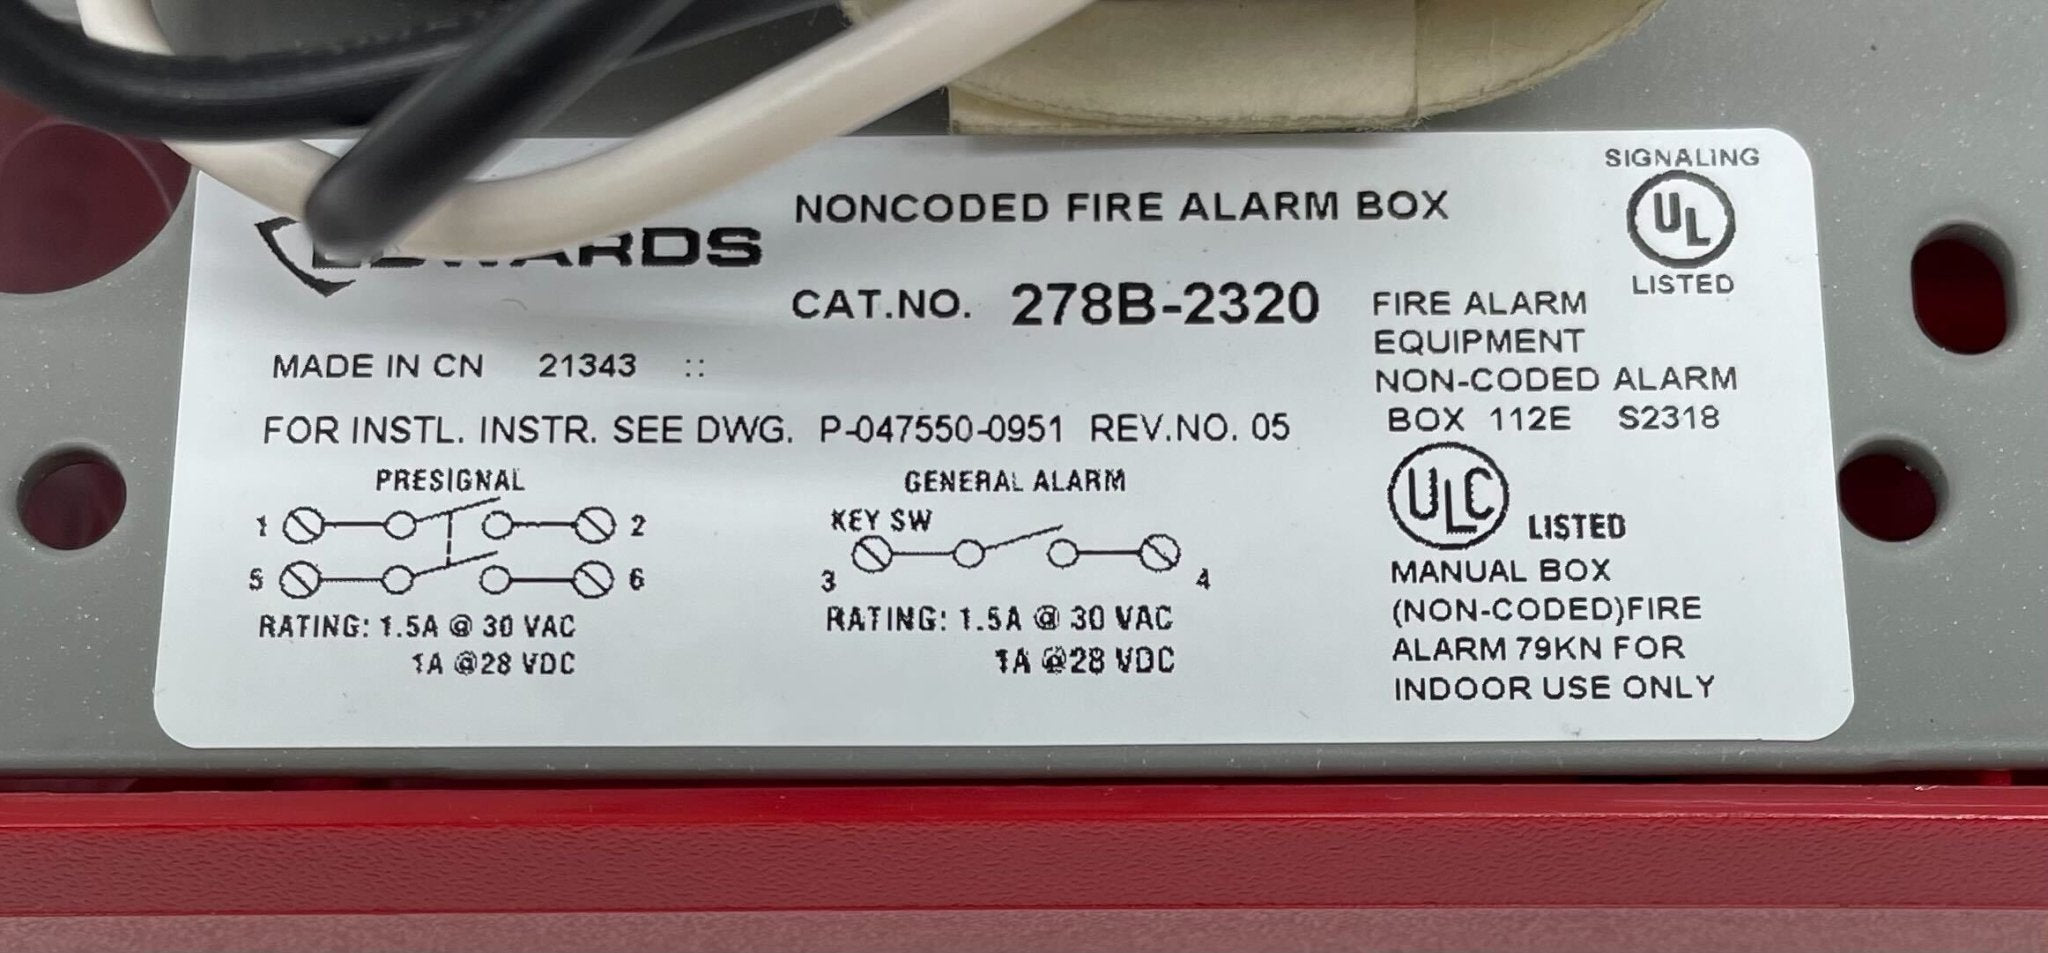 Edwards 278B-2320 - The Fire Alarm Supplier